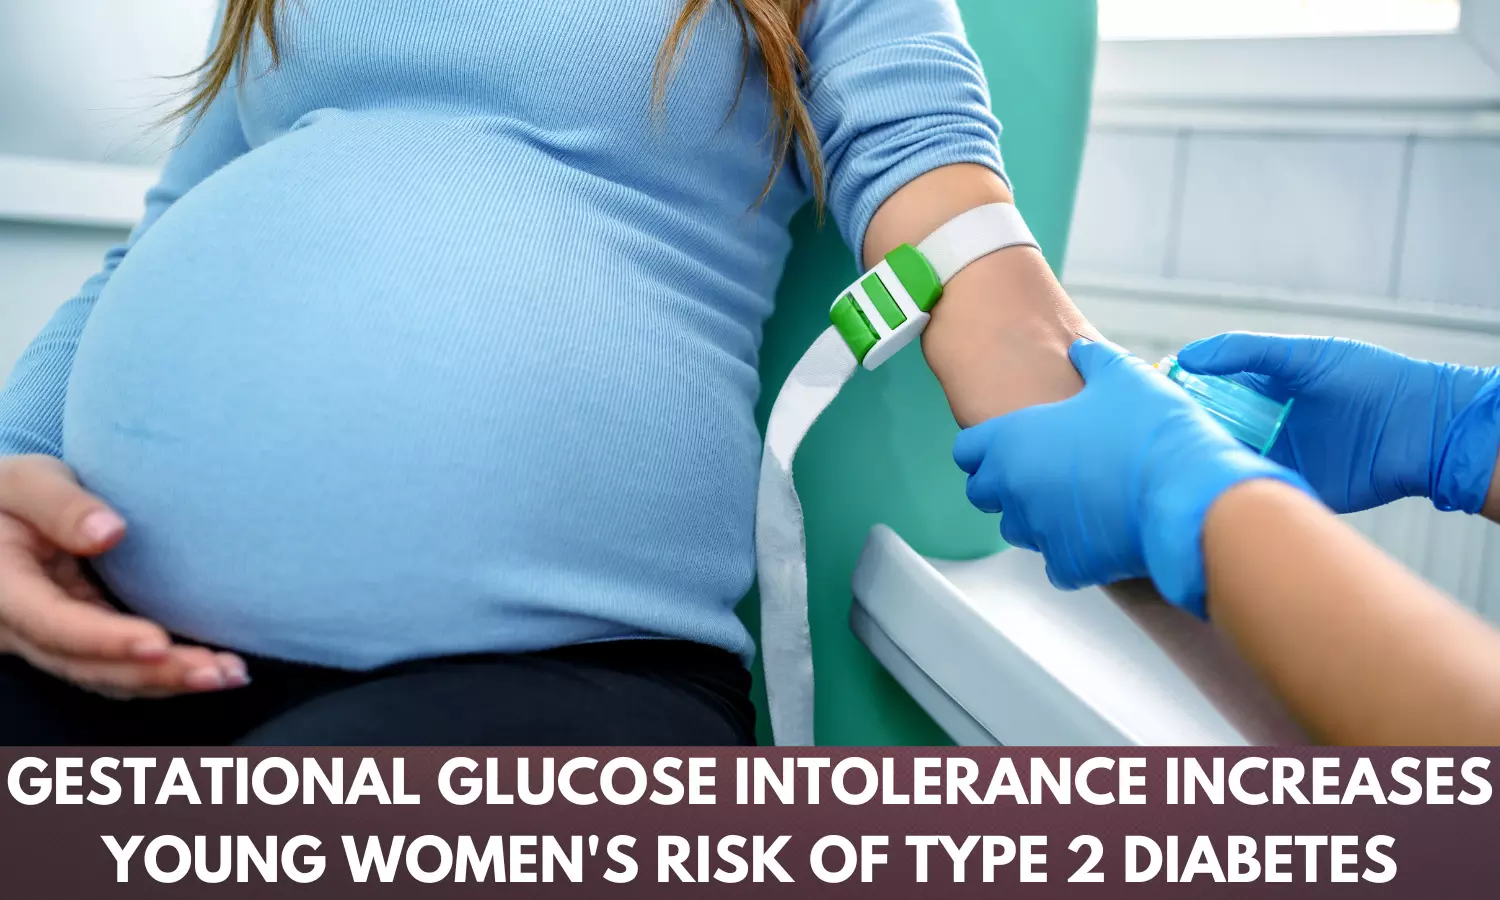 Gestational Glucose Intolerance Puts Young Women at High Risk for Type 2 Diabetes: The Lancet